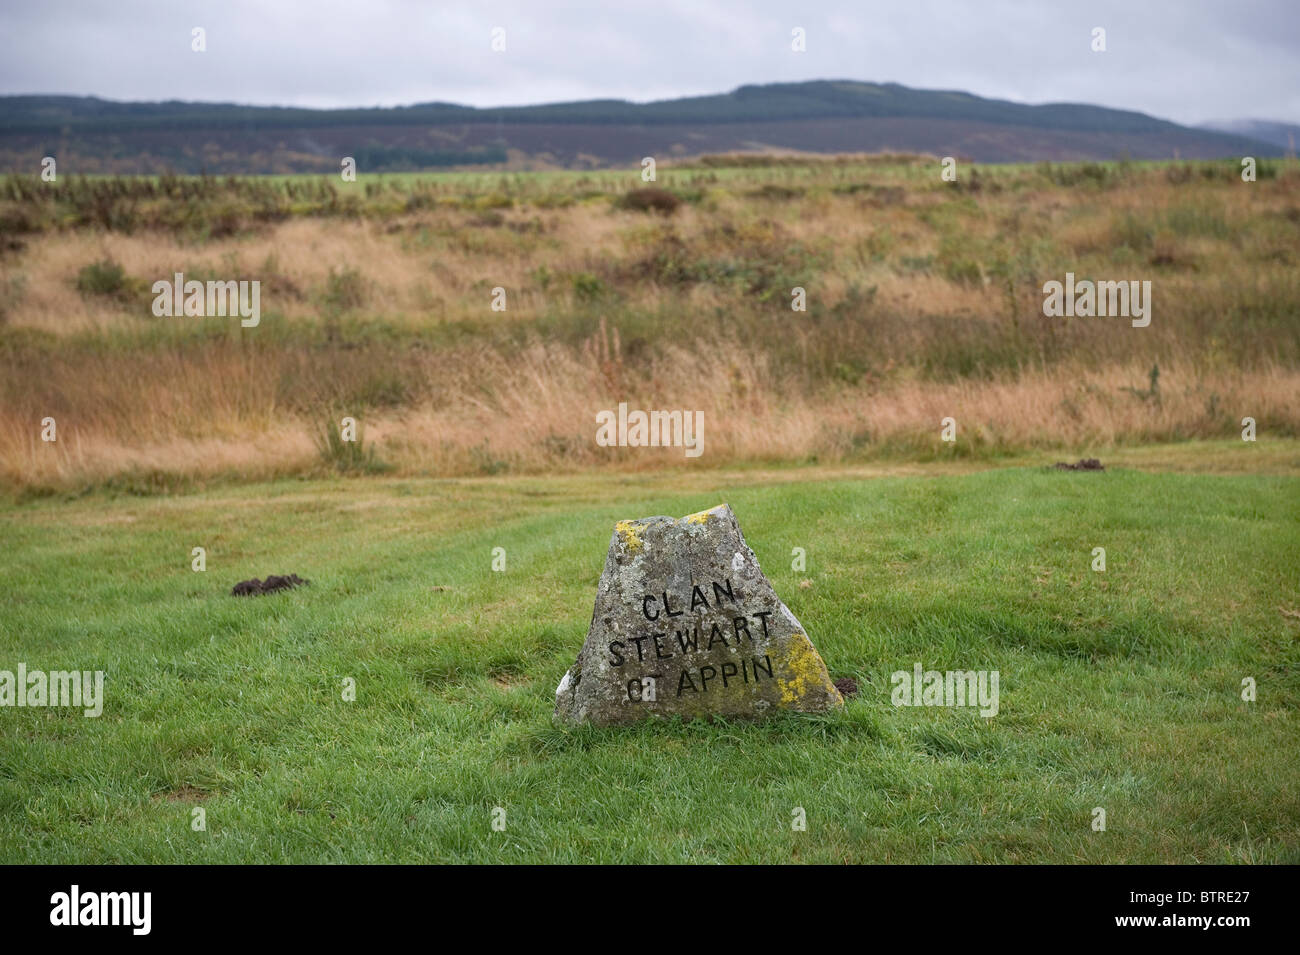 The Culloden Battlefield near Inverness, Scotland where on 16 April 1746 Bonnie Prince Charlie and the Jacobite cause was defea Stock Photo